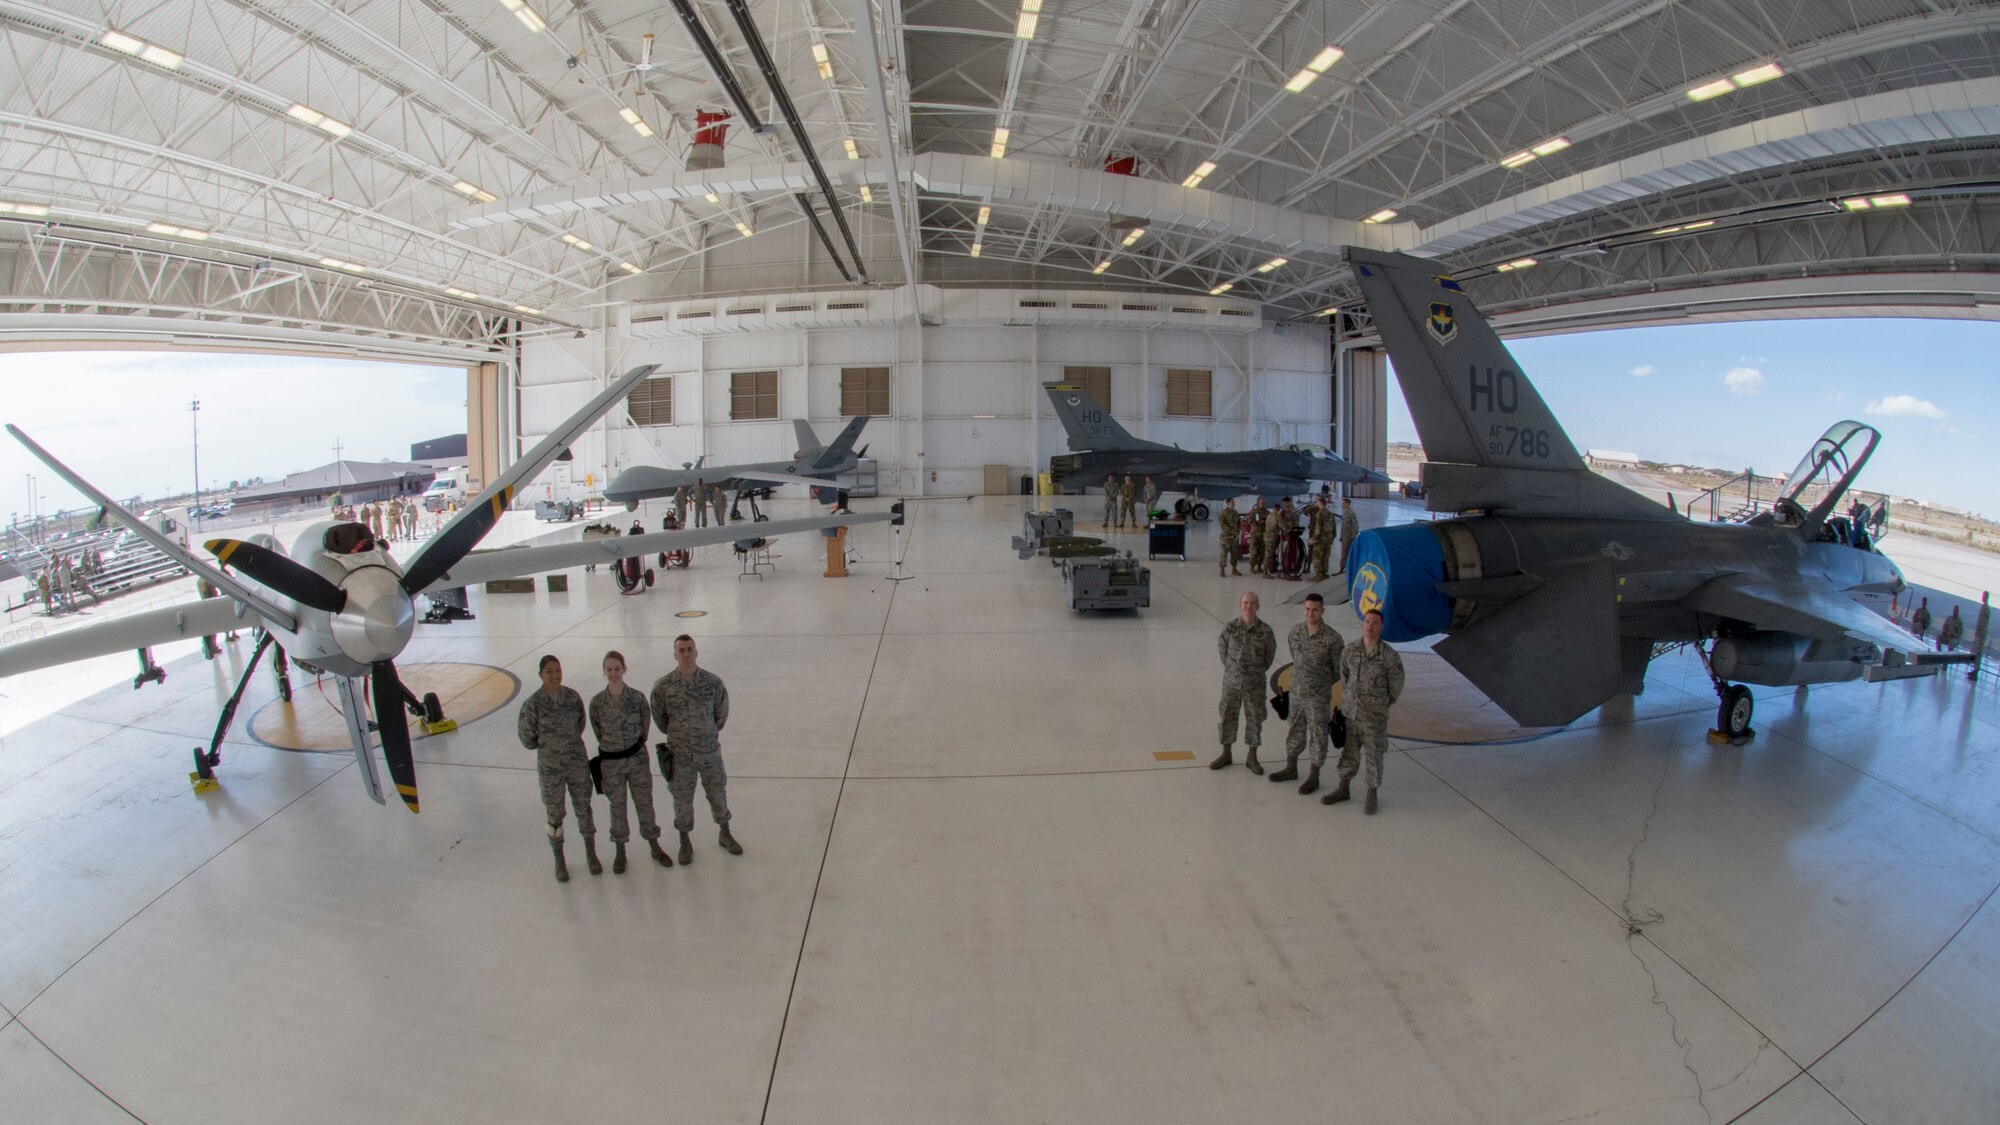 Airmen from the 49th Maintenance Group pose for a photo before the beginning of a load competition, Oct. 28, 2019, on Holloman Air Force Base, N.M. Two F-16 Vipers and two MQ-9 Reapers were used to test the loading skills of 12 Airmen during the 2019 third quarter load competition. (U.S. Air Force photo by Airman 1st Class Autumn Vogt)